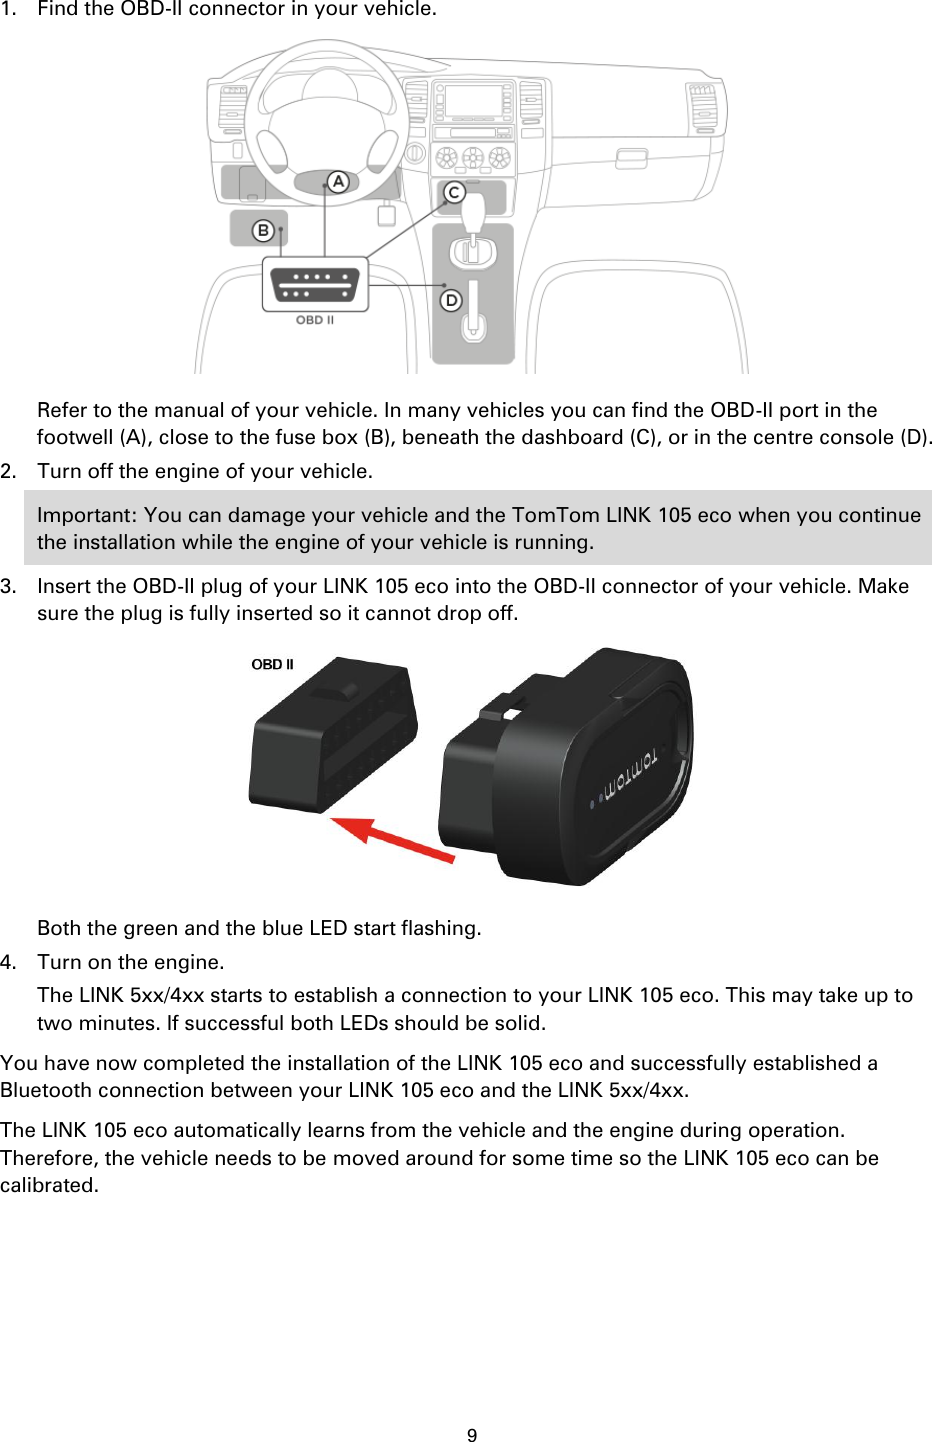 9    1. Find the OBD-II connector in your vehicle.  Refer to the manual of your vehicle. In many vehicles you can find the OBD-II port in the footwell (A), close to the fuse box (B), beneath the dashboard (C), or in the centre console (D). 2. Turn off the engine of your vehicle. Important: You can damage your vehicle and the TomTom LINK 105 eco when you continue the installation while the engine of your vehicle is running. 3. Insert the OBD-II plug of your LINK 105 eco into the OBD-II connector of your vehicle. Make sure the plug is fully inserted so it cannot drop off.  Both the green and the blue LED start flashing. 4. Turn on the engine. The LINK 5xx/4xx starts to establish a connection to your LINK 105 eco. This may take up to two minutes. If successful both LEDs should be solid. You have now completed the installation of the LINK 105 eco and successfully established a Bluetooth connection between your LINK 105 eco and the LINK 5xx/4xx. The LINK 105 eco automatically learns from the vehicle and the engine during operation. Therefore, the vehicle needs to be moved around for some time so the LINK 105 eco can be calibrated.  